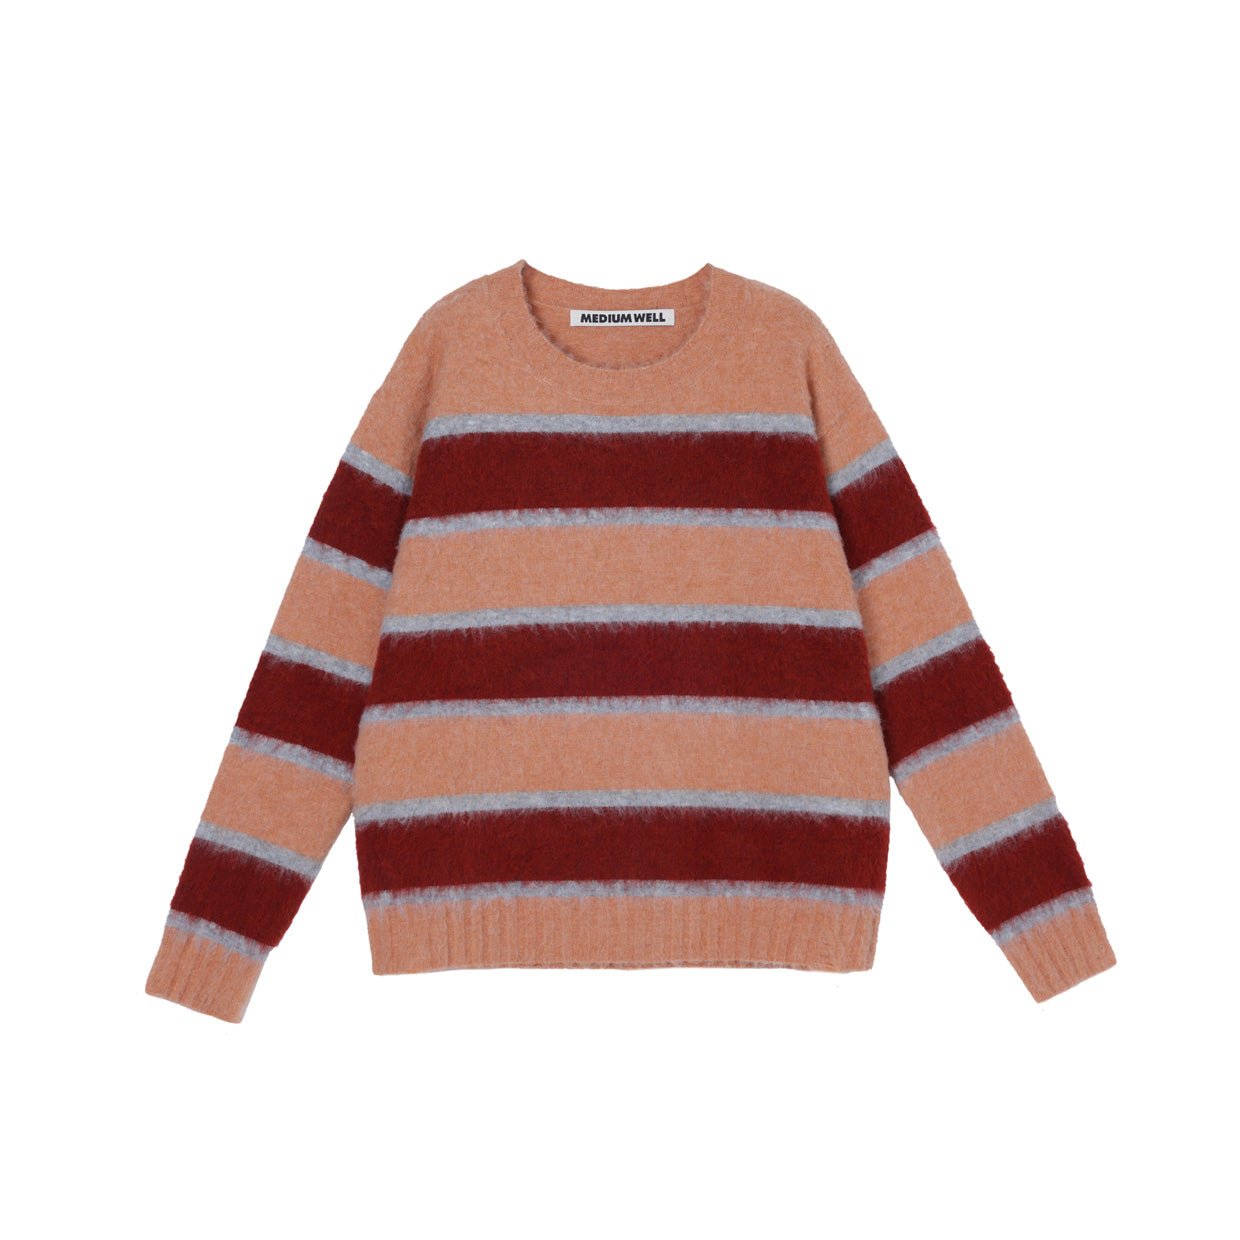 MEDIUM WELL Red Striped Destroy Sweater | MADA IN CHINA